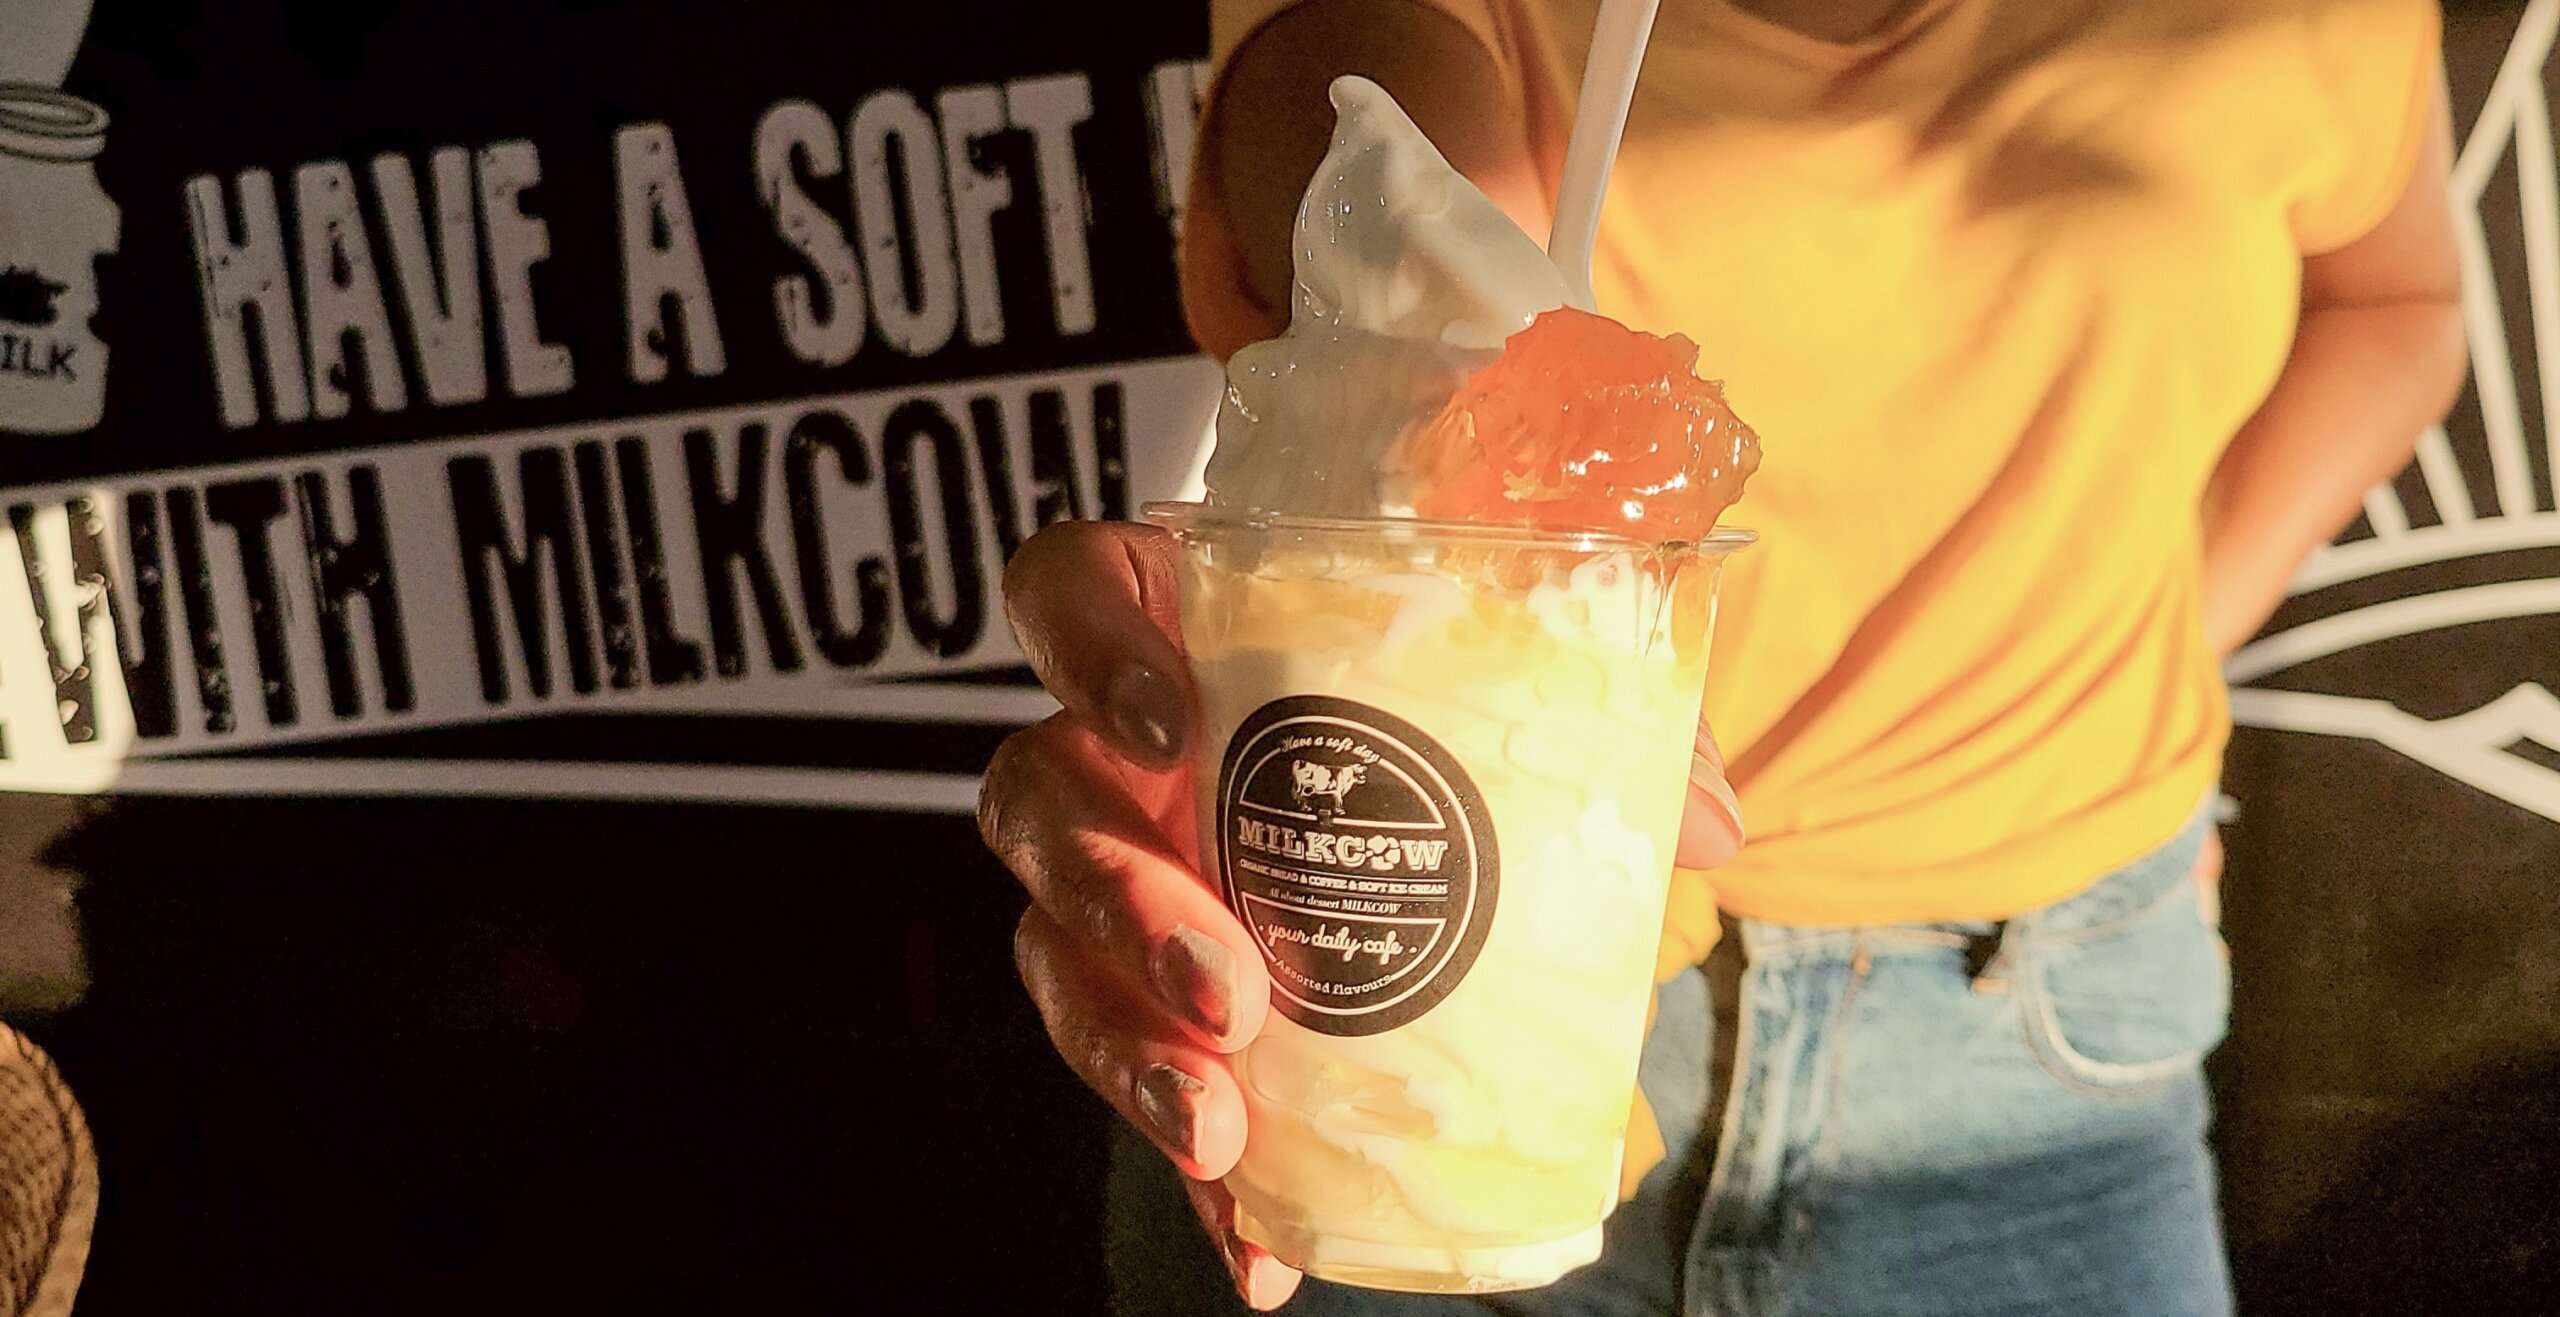 a woman in a yellow top holding a white soft serve ice cream from milkcow cafe in her hand against a black backdrop